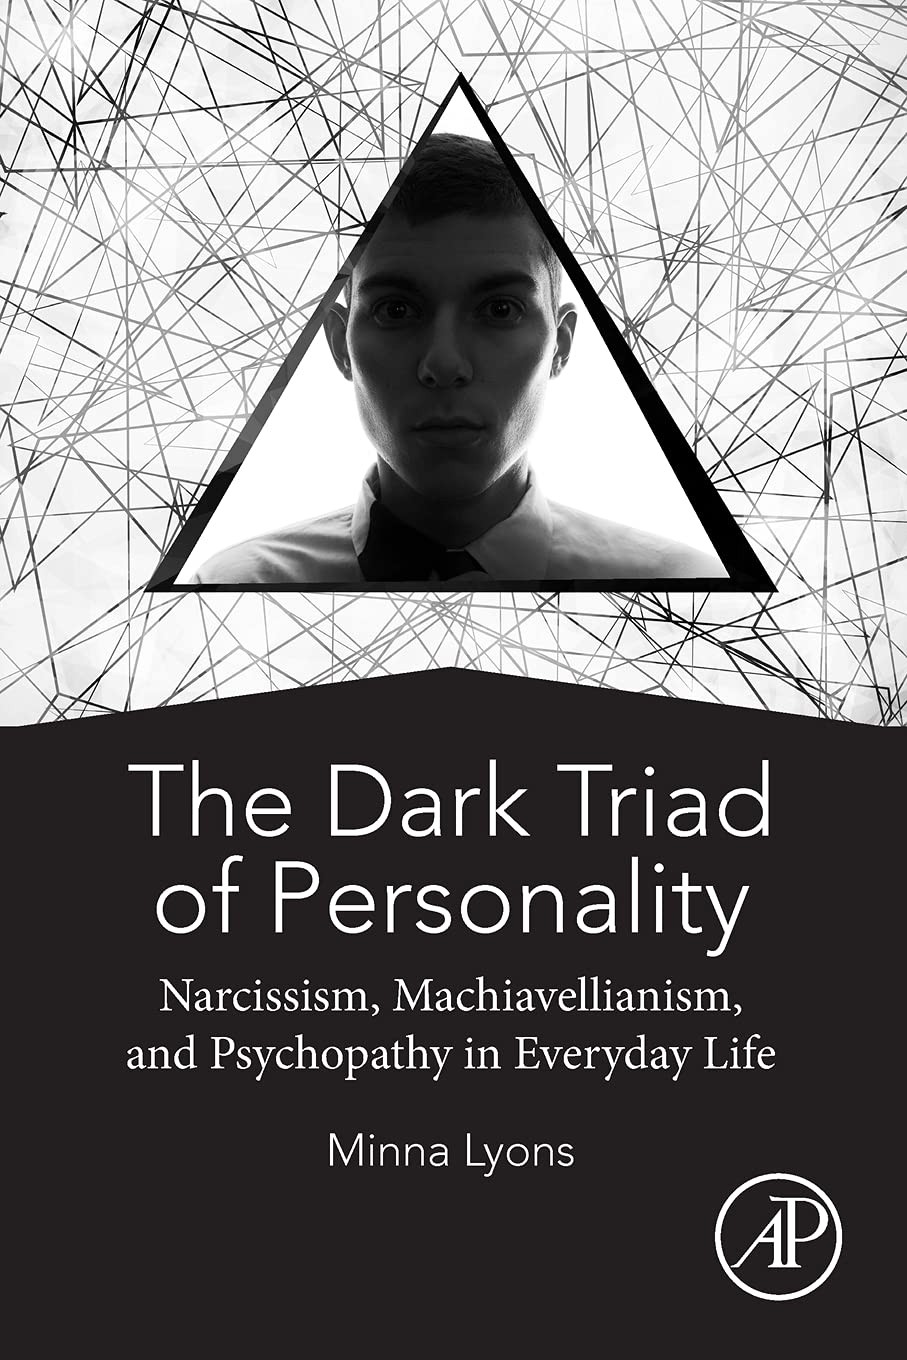 The Dark Triad of Personality: Narcissism, Machiavellianism, and Psychopathy in Everyday Life